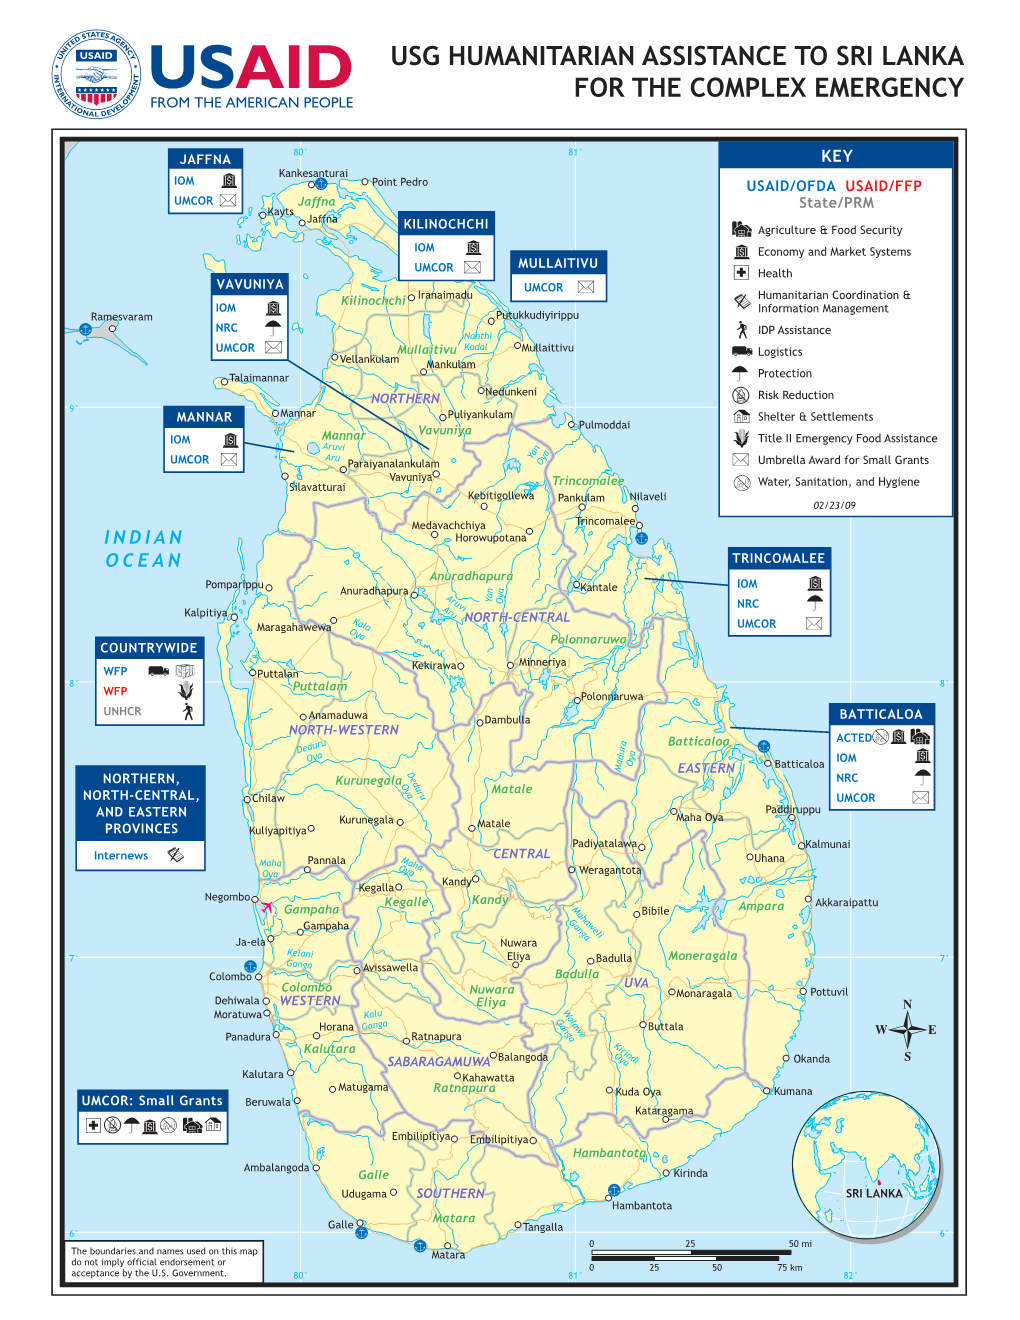 Usg Humanitarian Assistance to Sri Lanka for the Complex Emergency